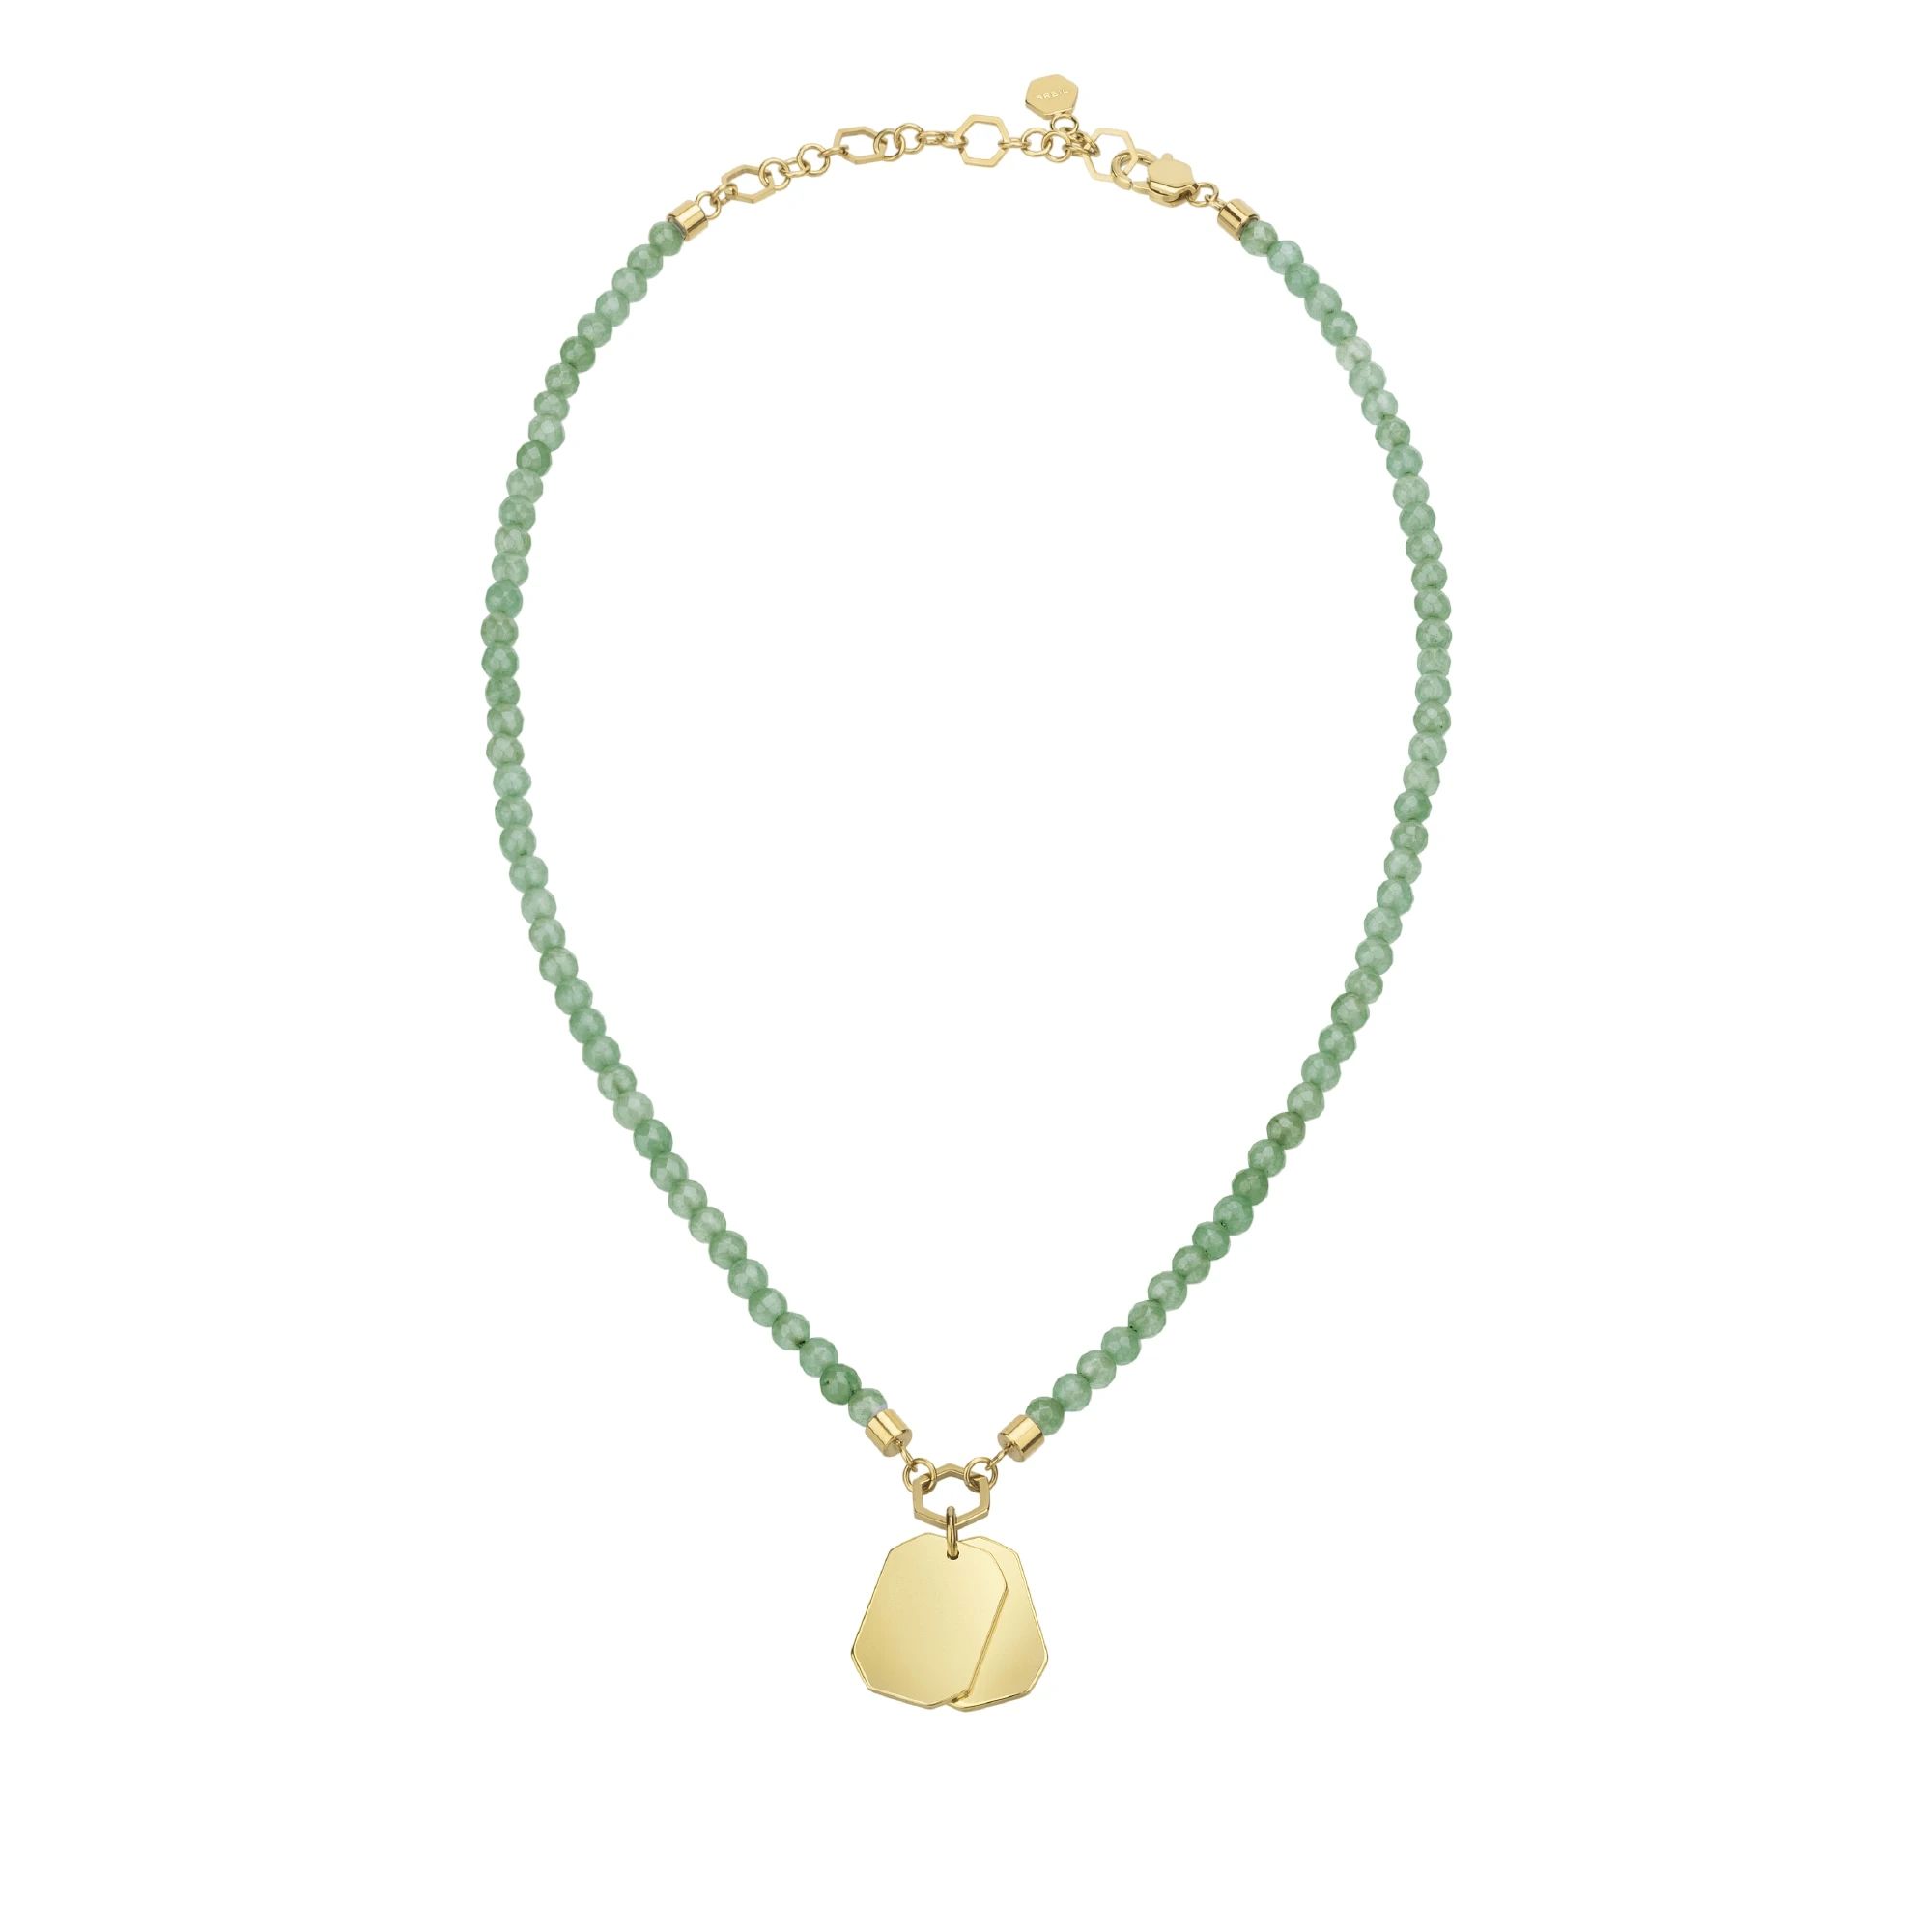 PRIVATE CODE - GREEN ADVENTURINE NECKLACE WITH IP GOLD STEEL PENDANT - 1 - TJ3152 | Breil